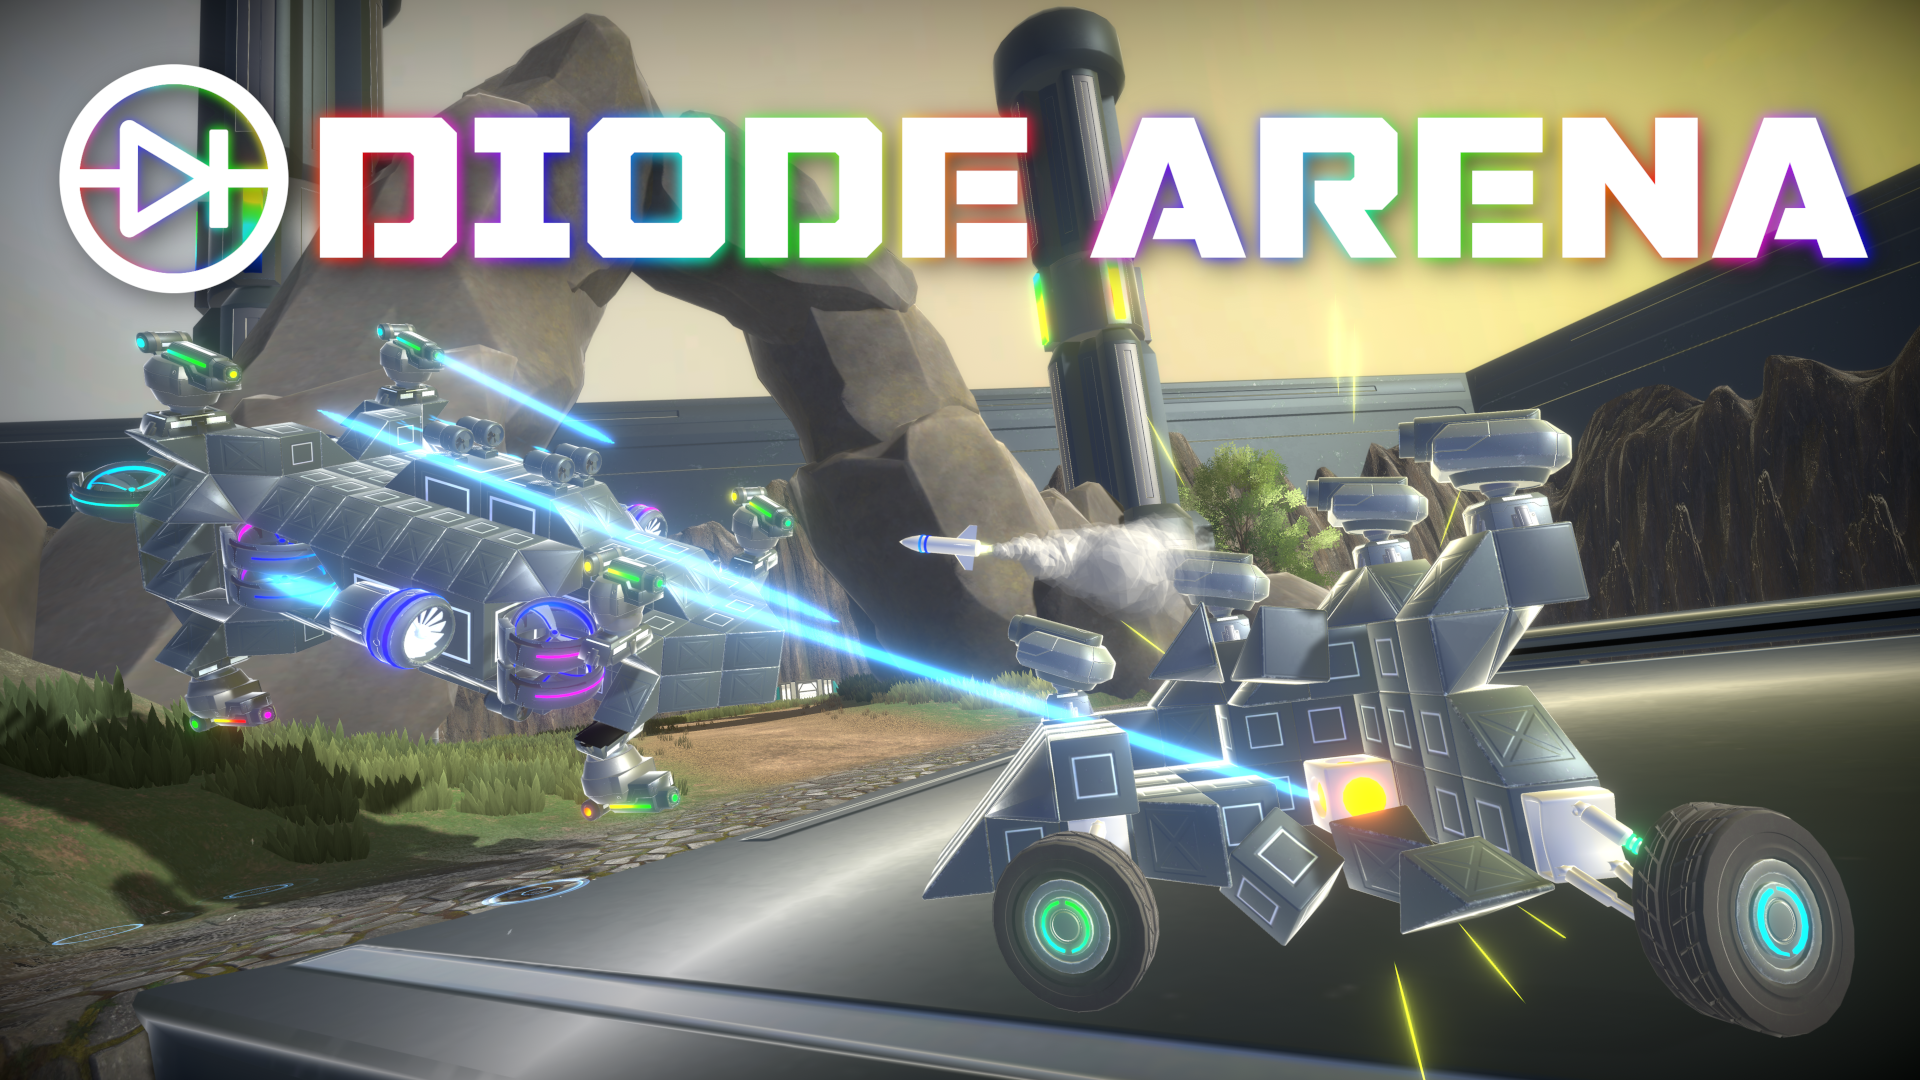 Diode Arena cover image